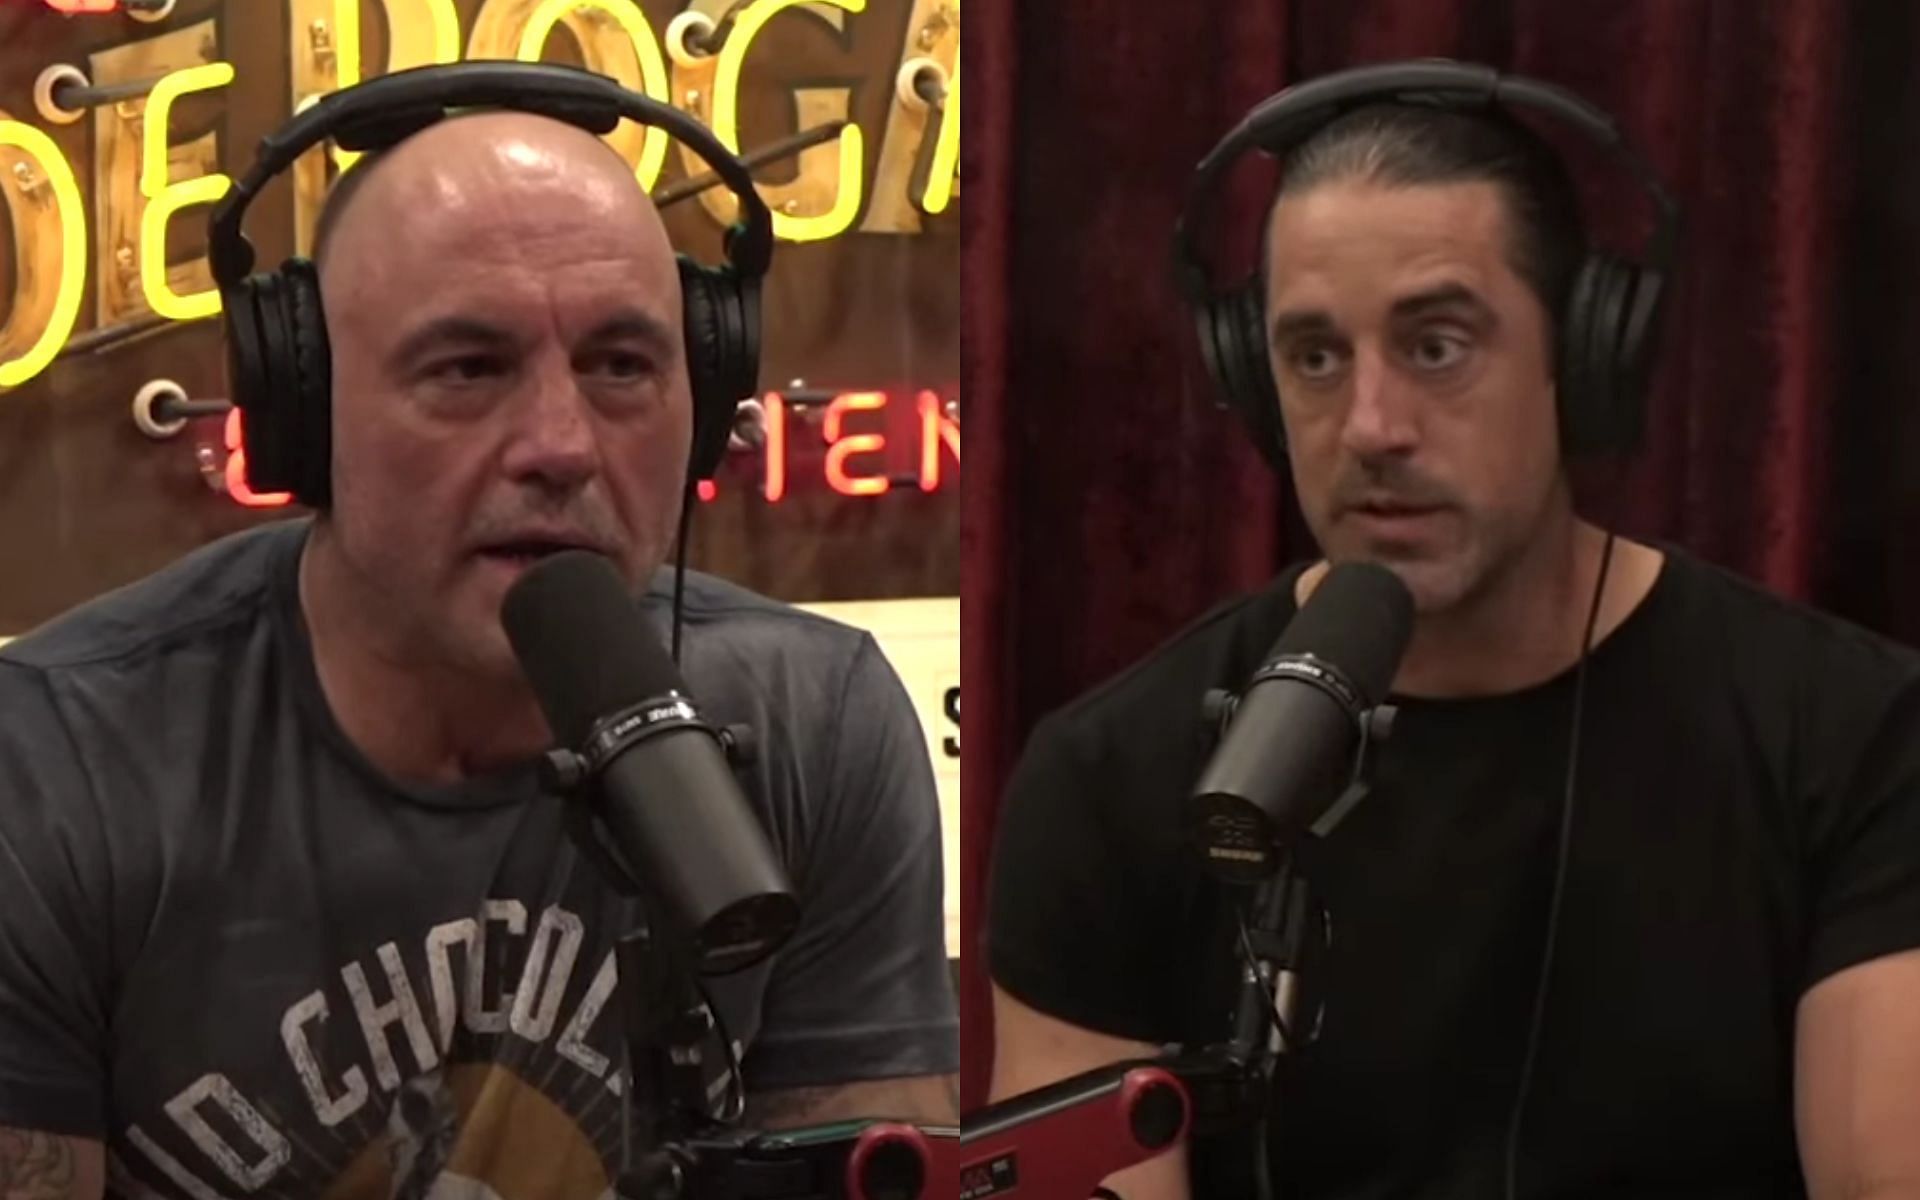 Joe Rogan (left), Aaron Rodgers (right) [Images courtesy of PowerfulJRE on YouTube]